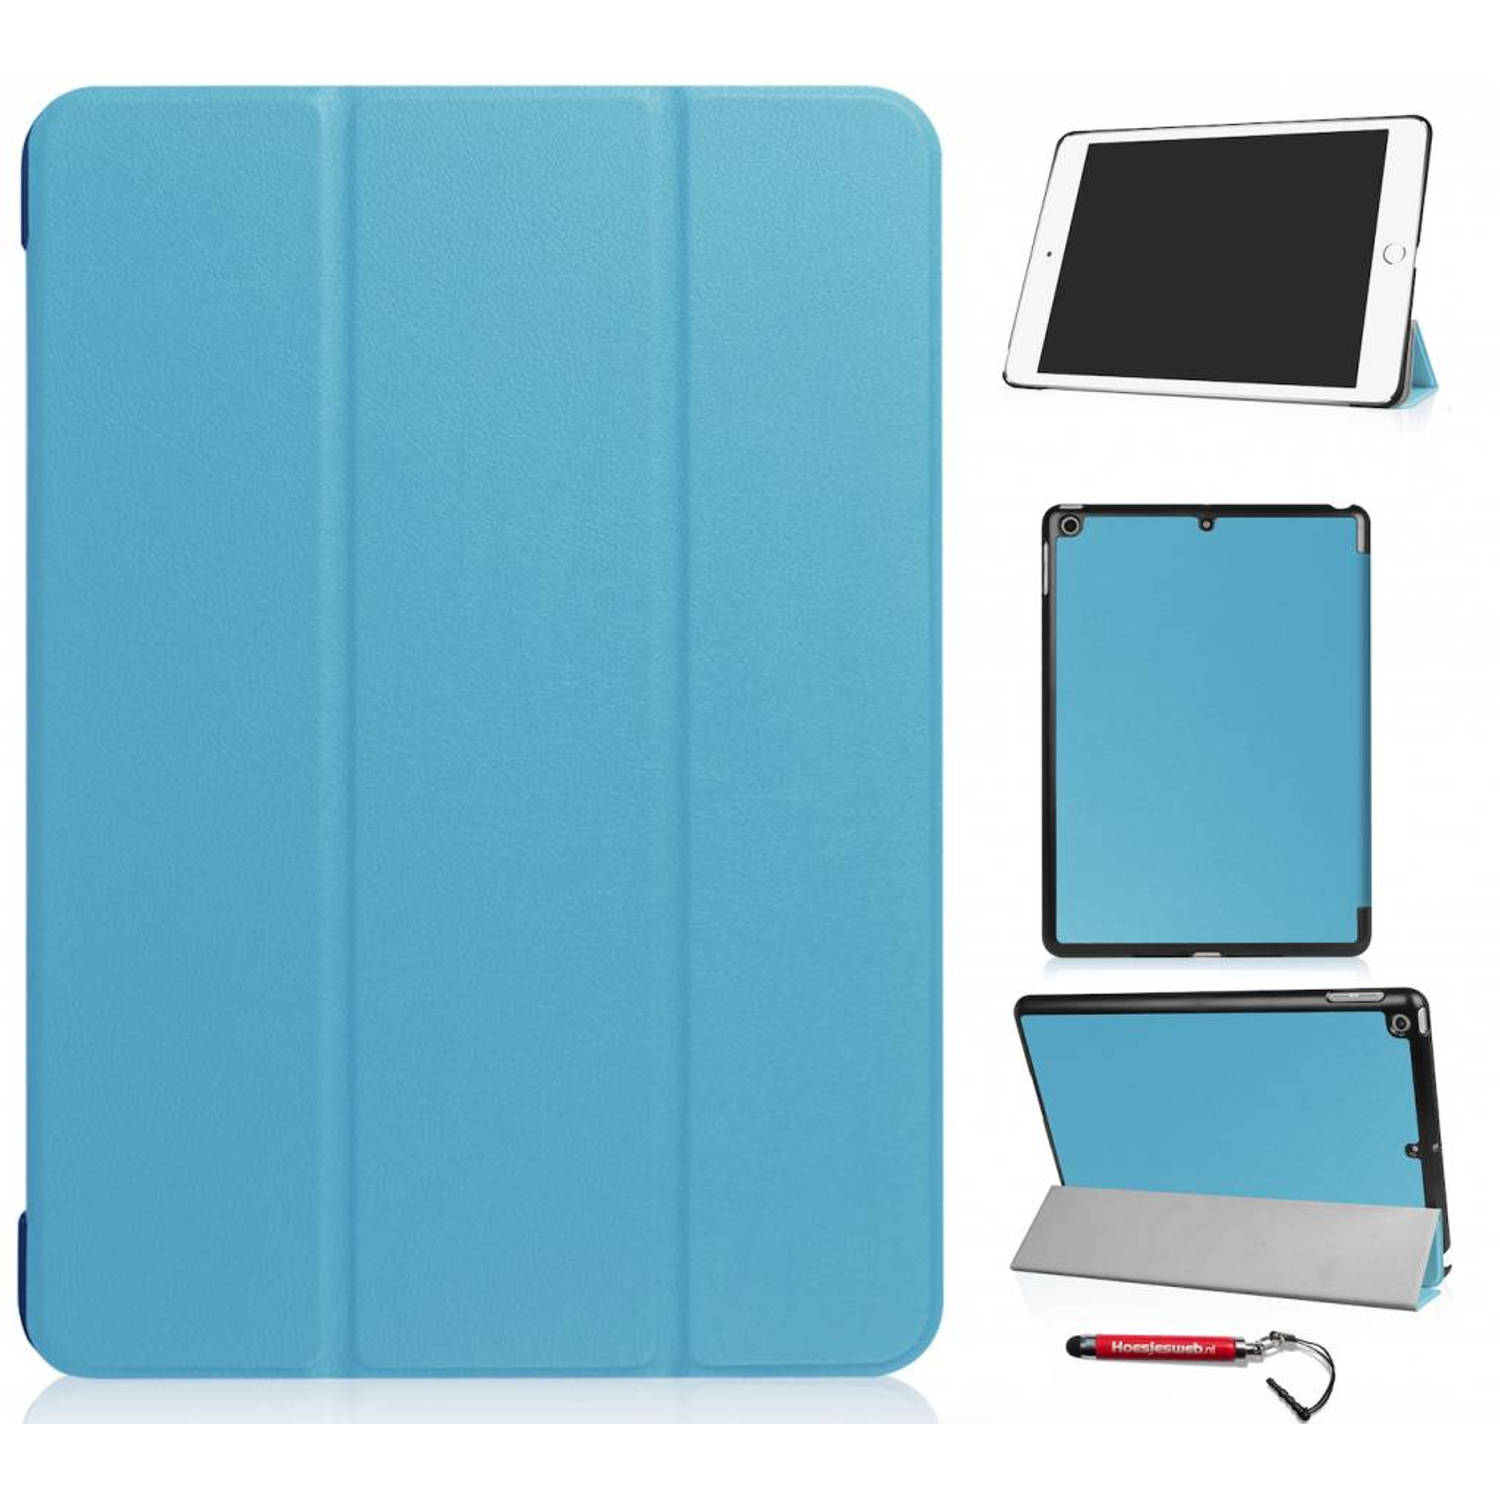 hoes ipad 2017 9.7 NEWSmart Cover blauw / Vouw hoesjes Apple iPad 2017 / Vouw hoesje iPad 2017 - Ipad hoes, Tablethoes